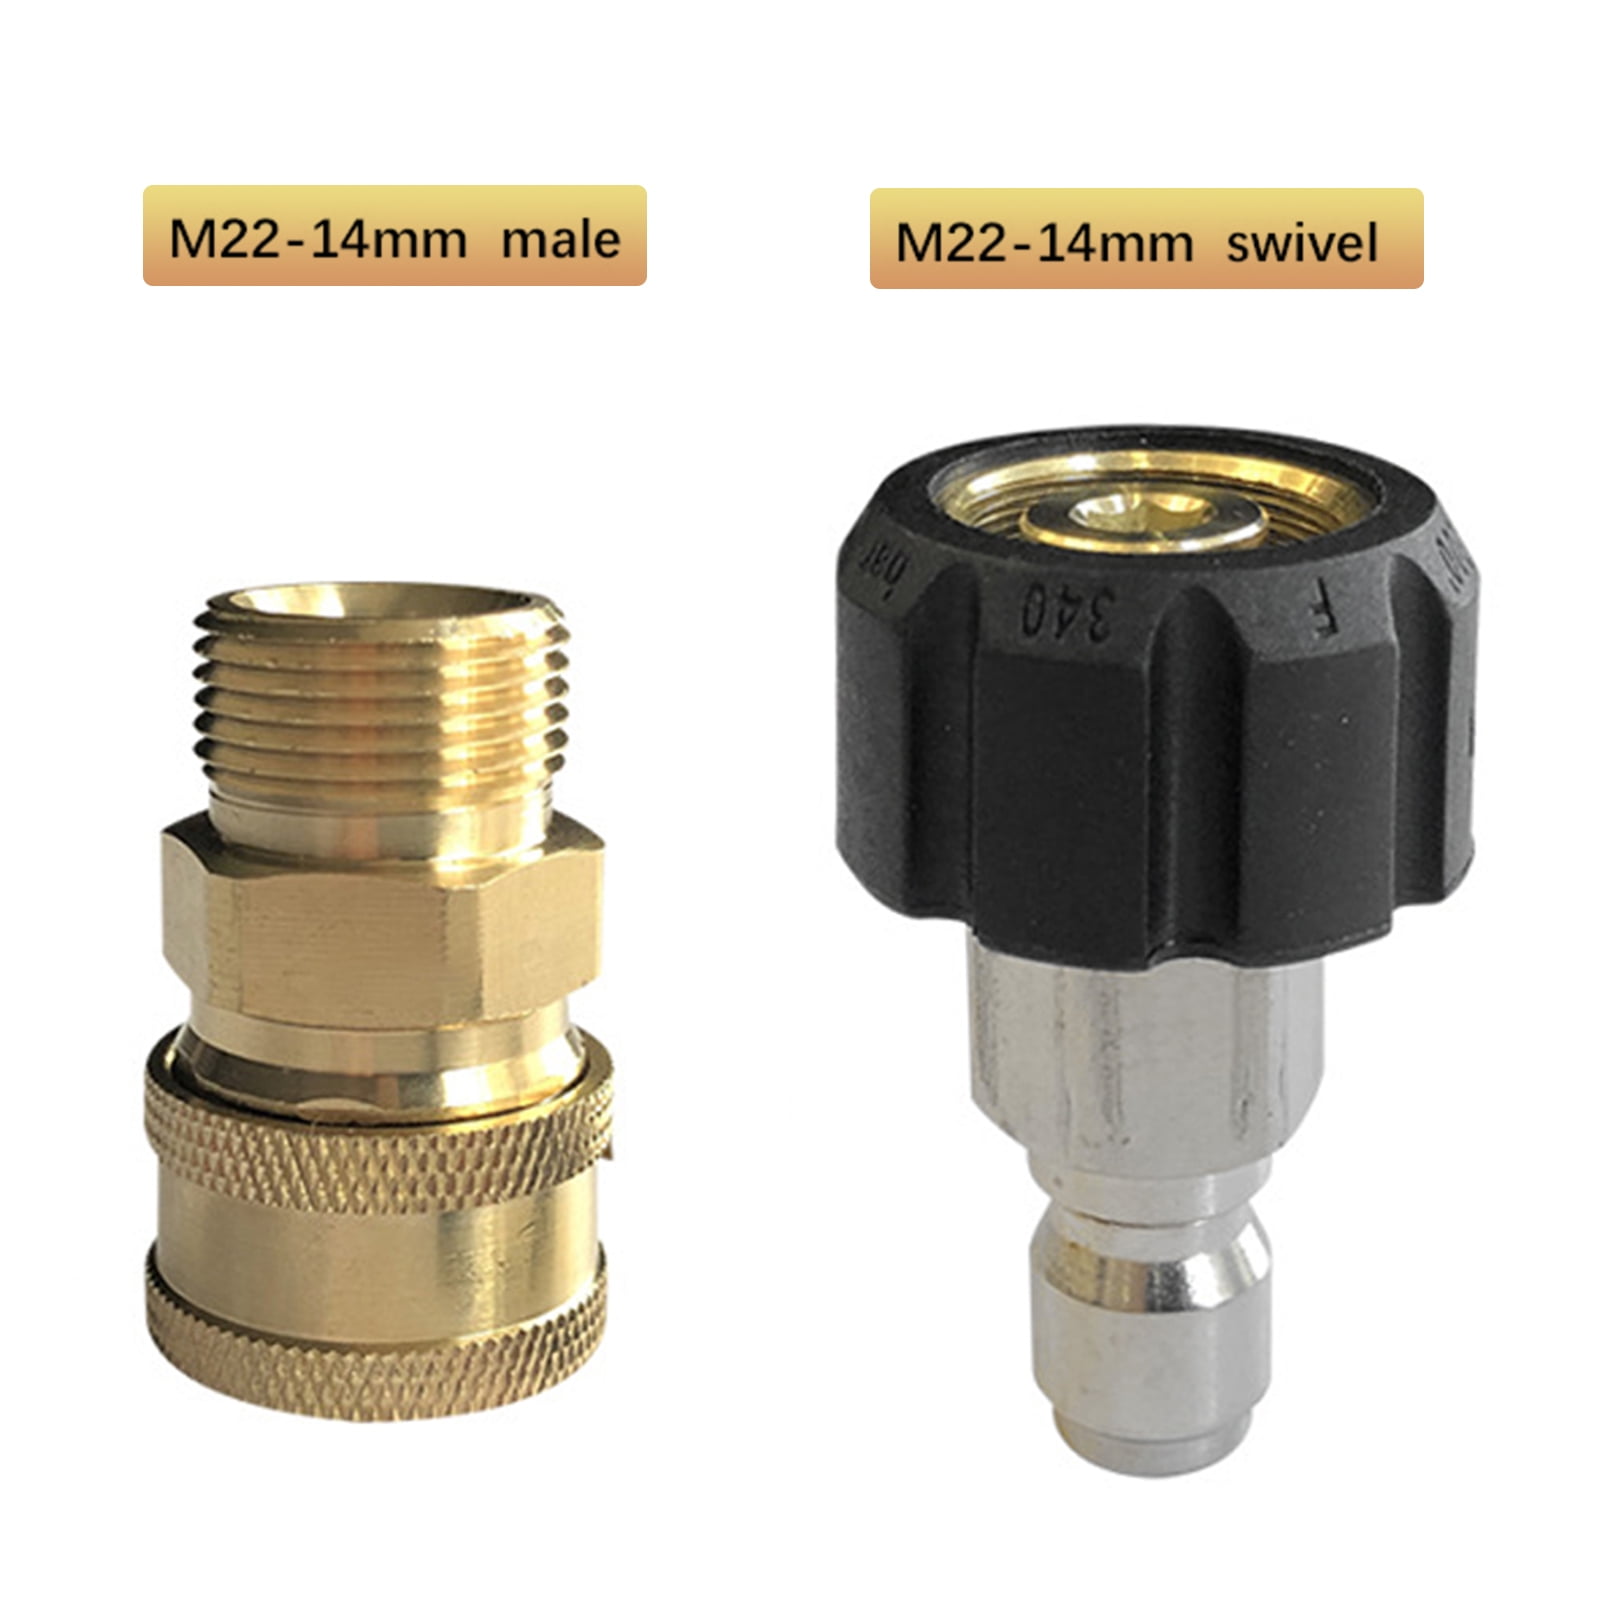 Pressure Washer Adapter Set M22 Male Fitting for Gardening Spray 